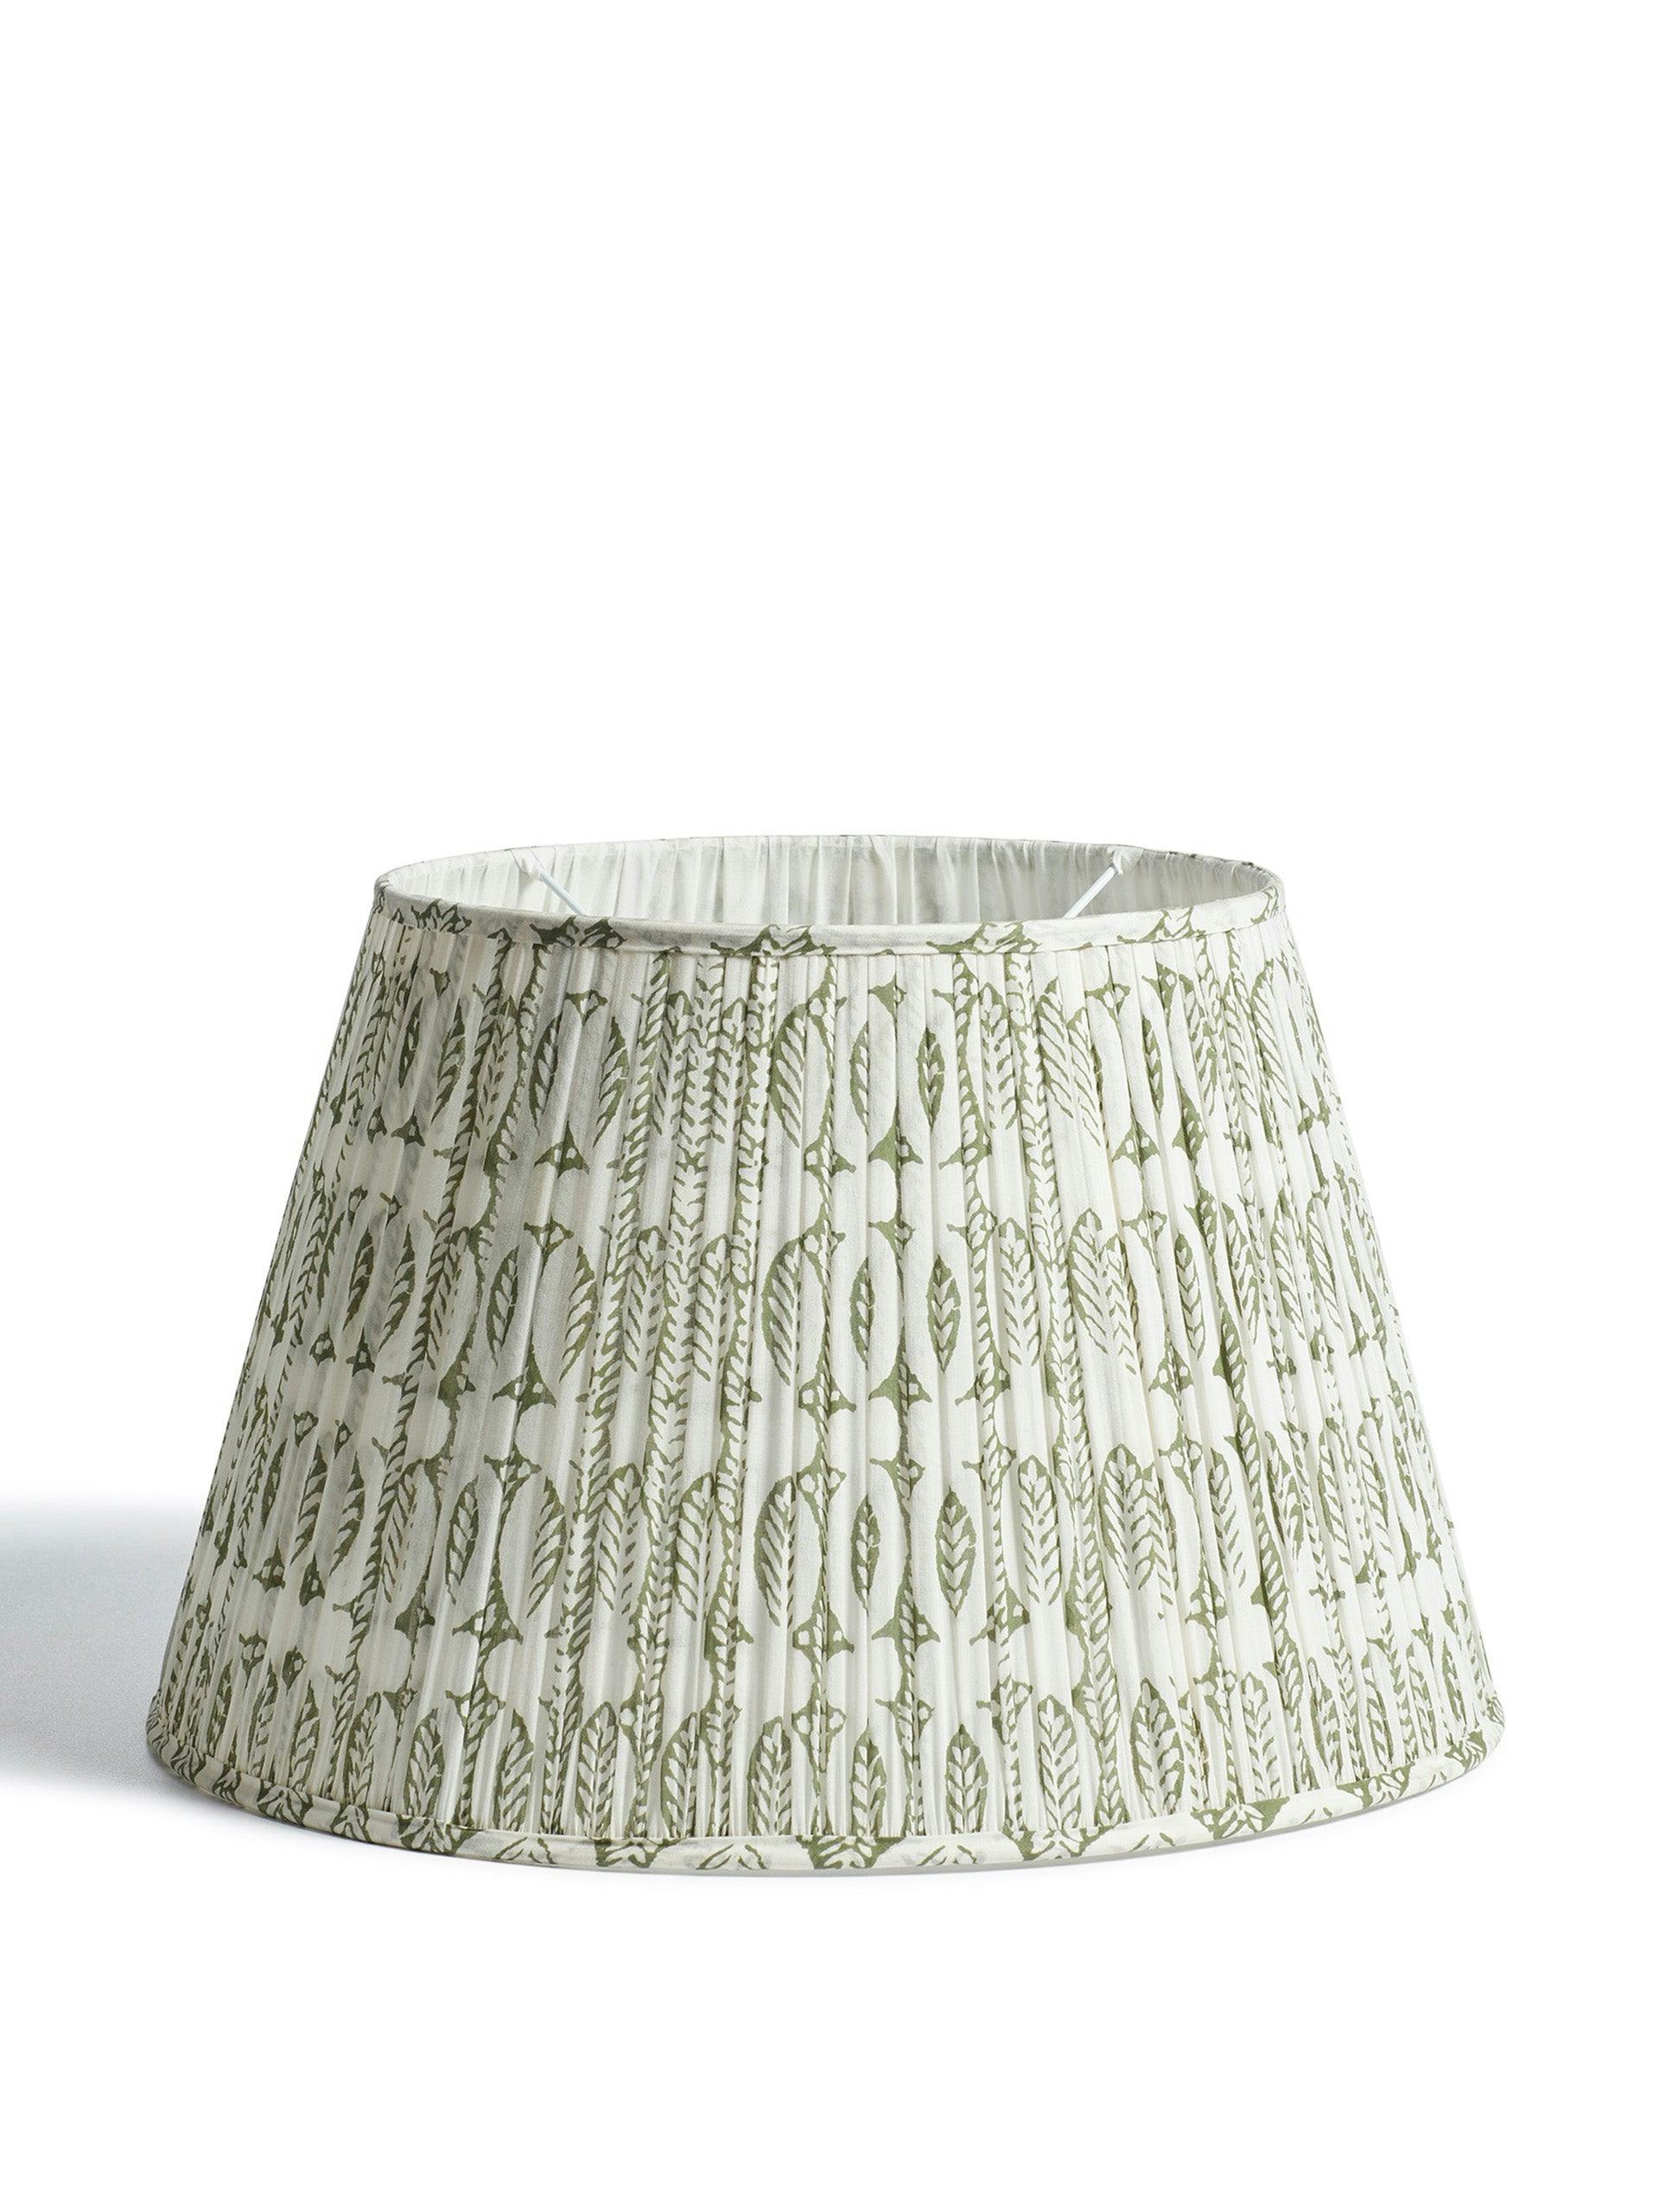 Pleated cotton lampshade